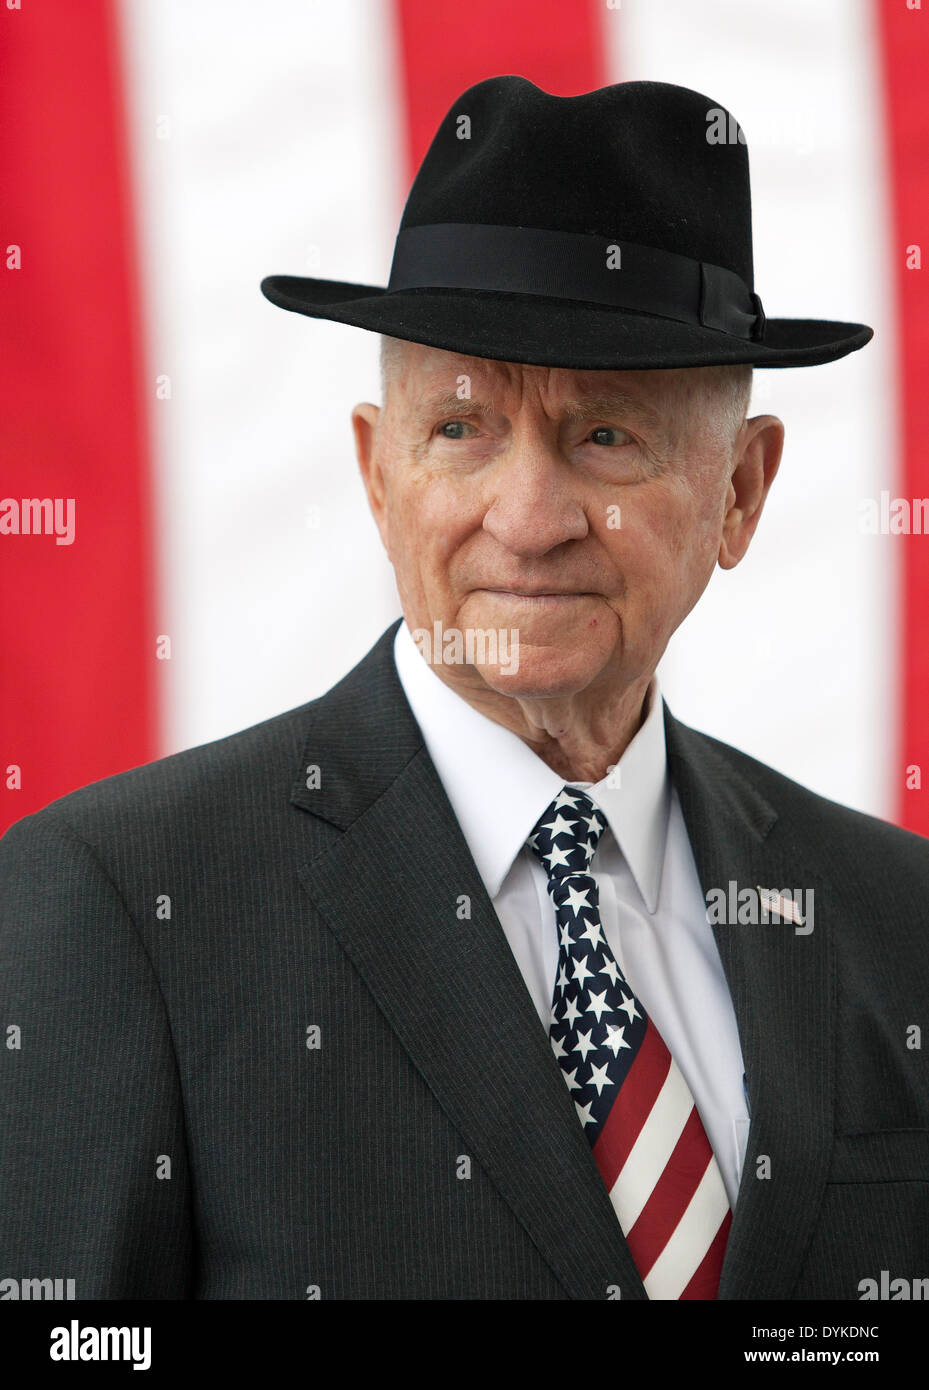 US politician and businessman Ross Perot during an event at the Army John F. Kennedy Special Warfare Center April 5, 2012 in Fort Bragg, North Carolina. Stock Photo